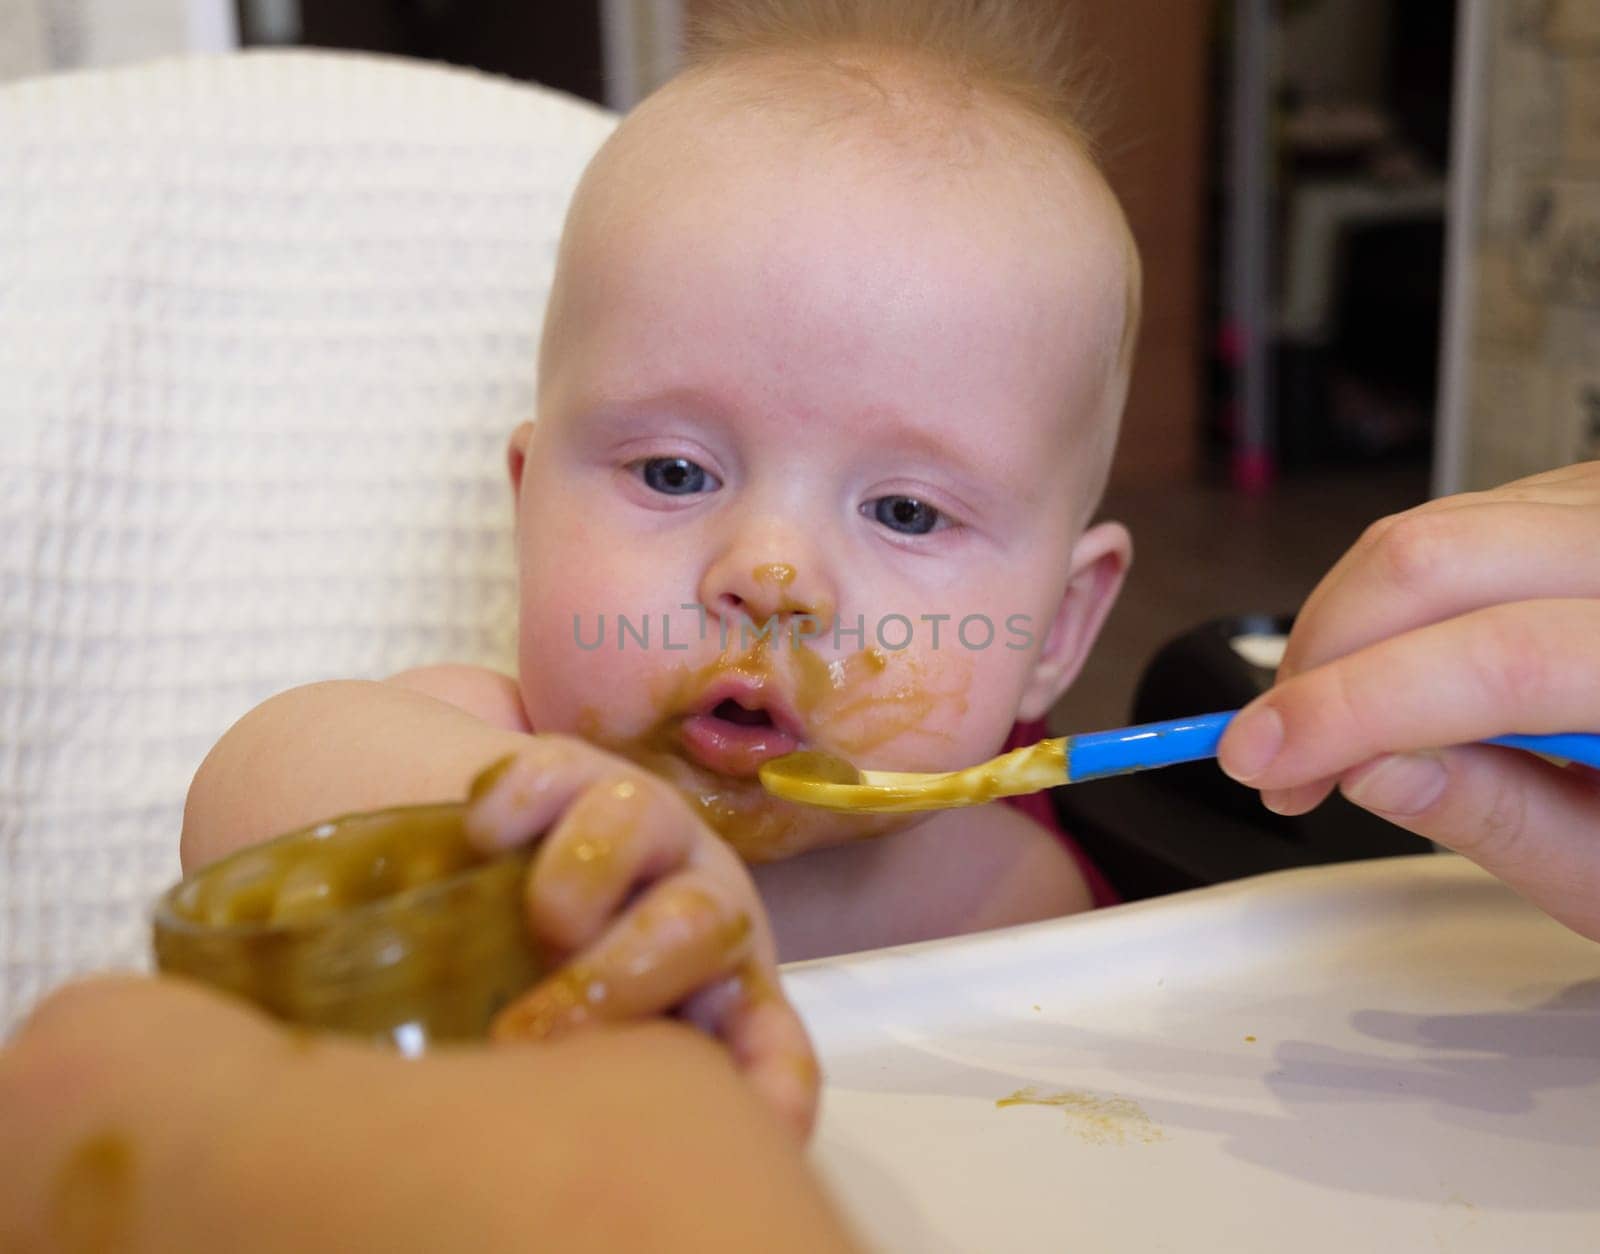 Mom feeding little boy with broccoli puree. Child at the age of six months eats broccoli while sitting on a baby chair.